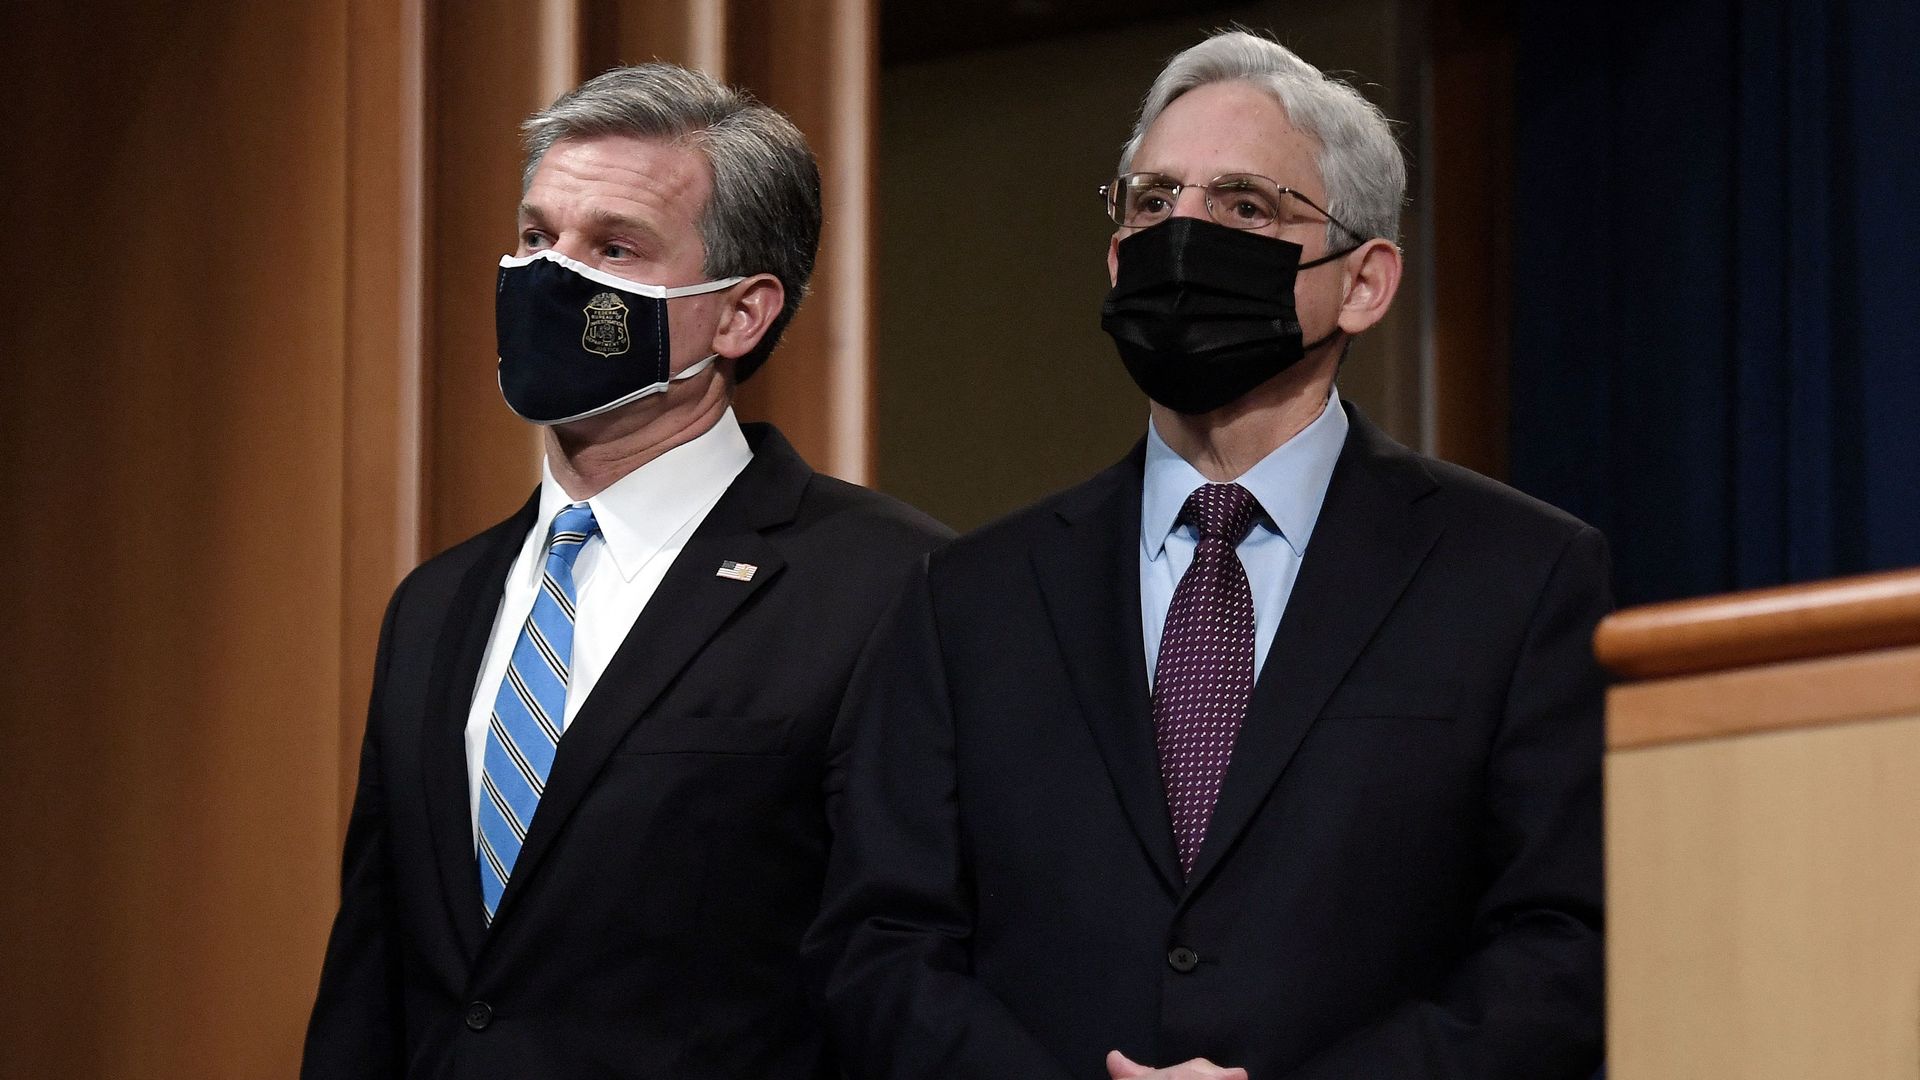 FBI Director Christopher Wray and Attorney General Merrick Garland standing next to each other, both wearing masks.